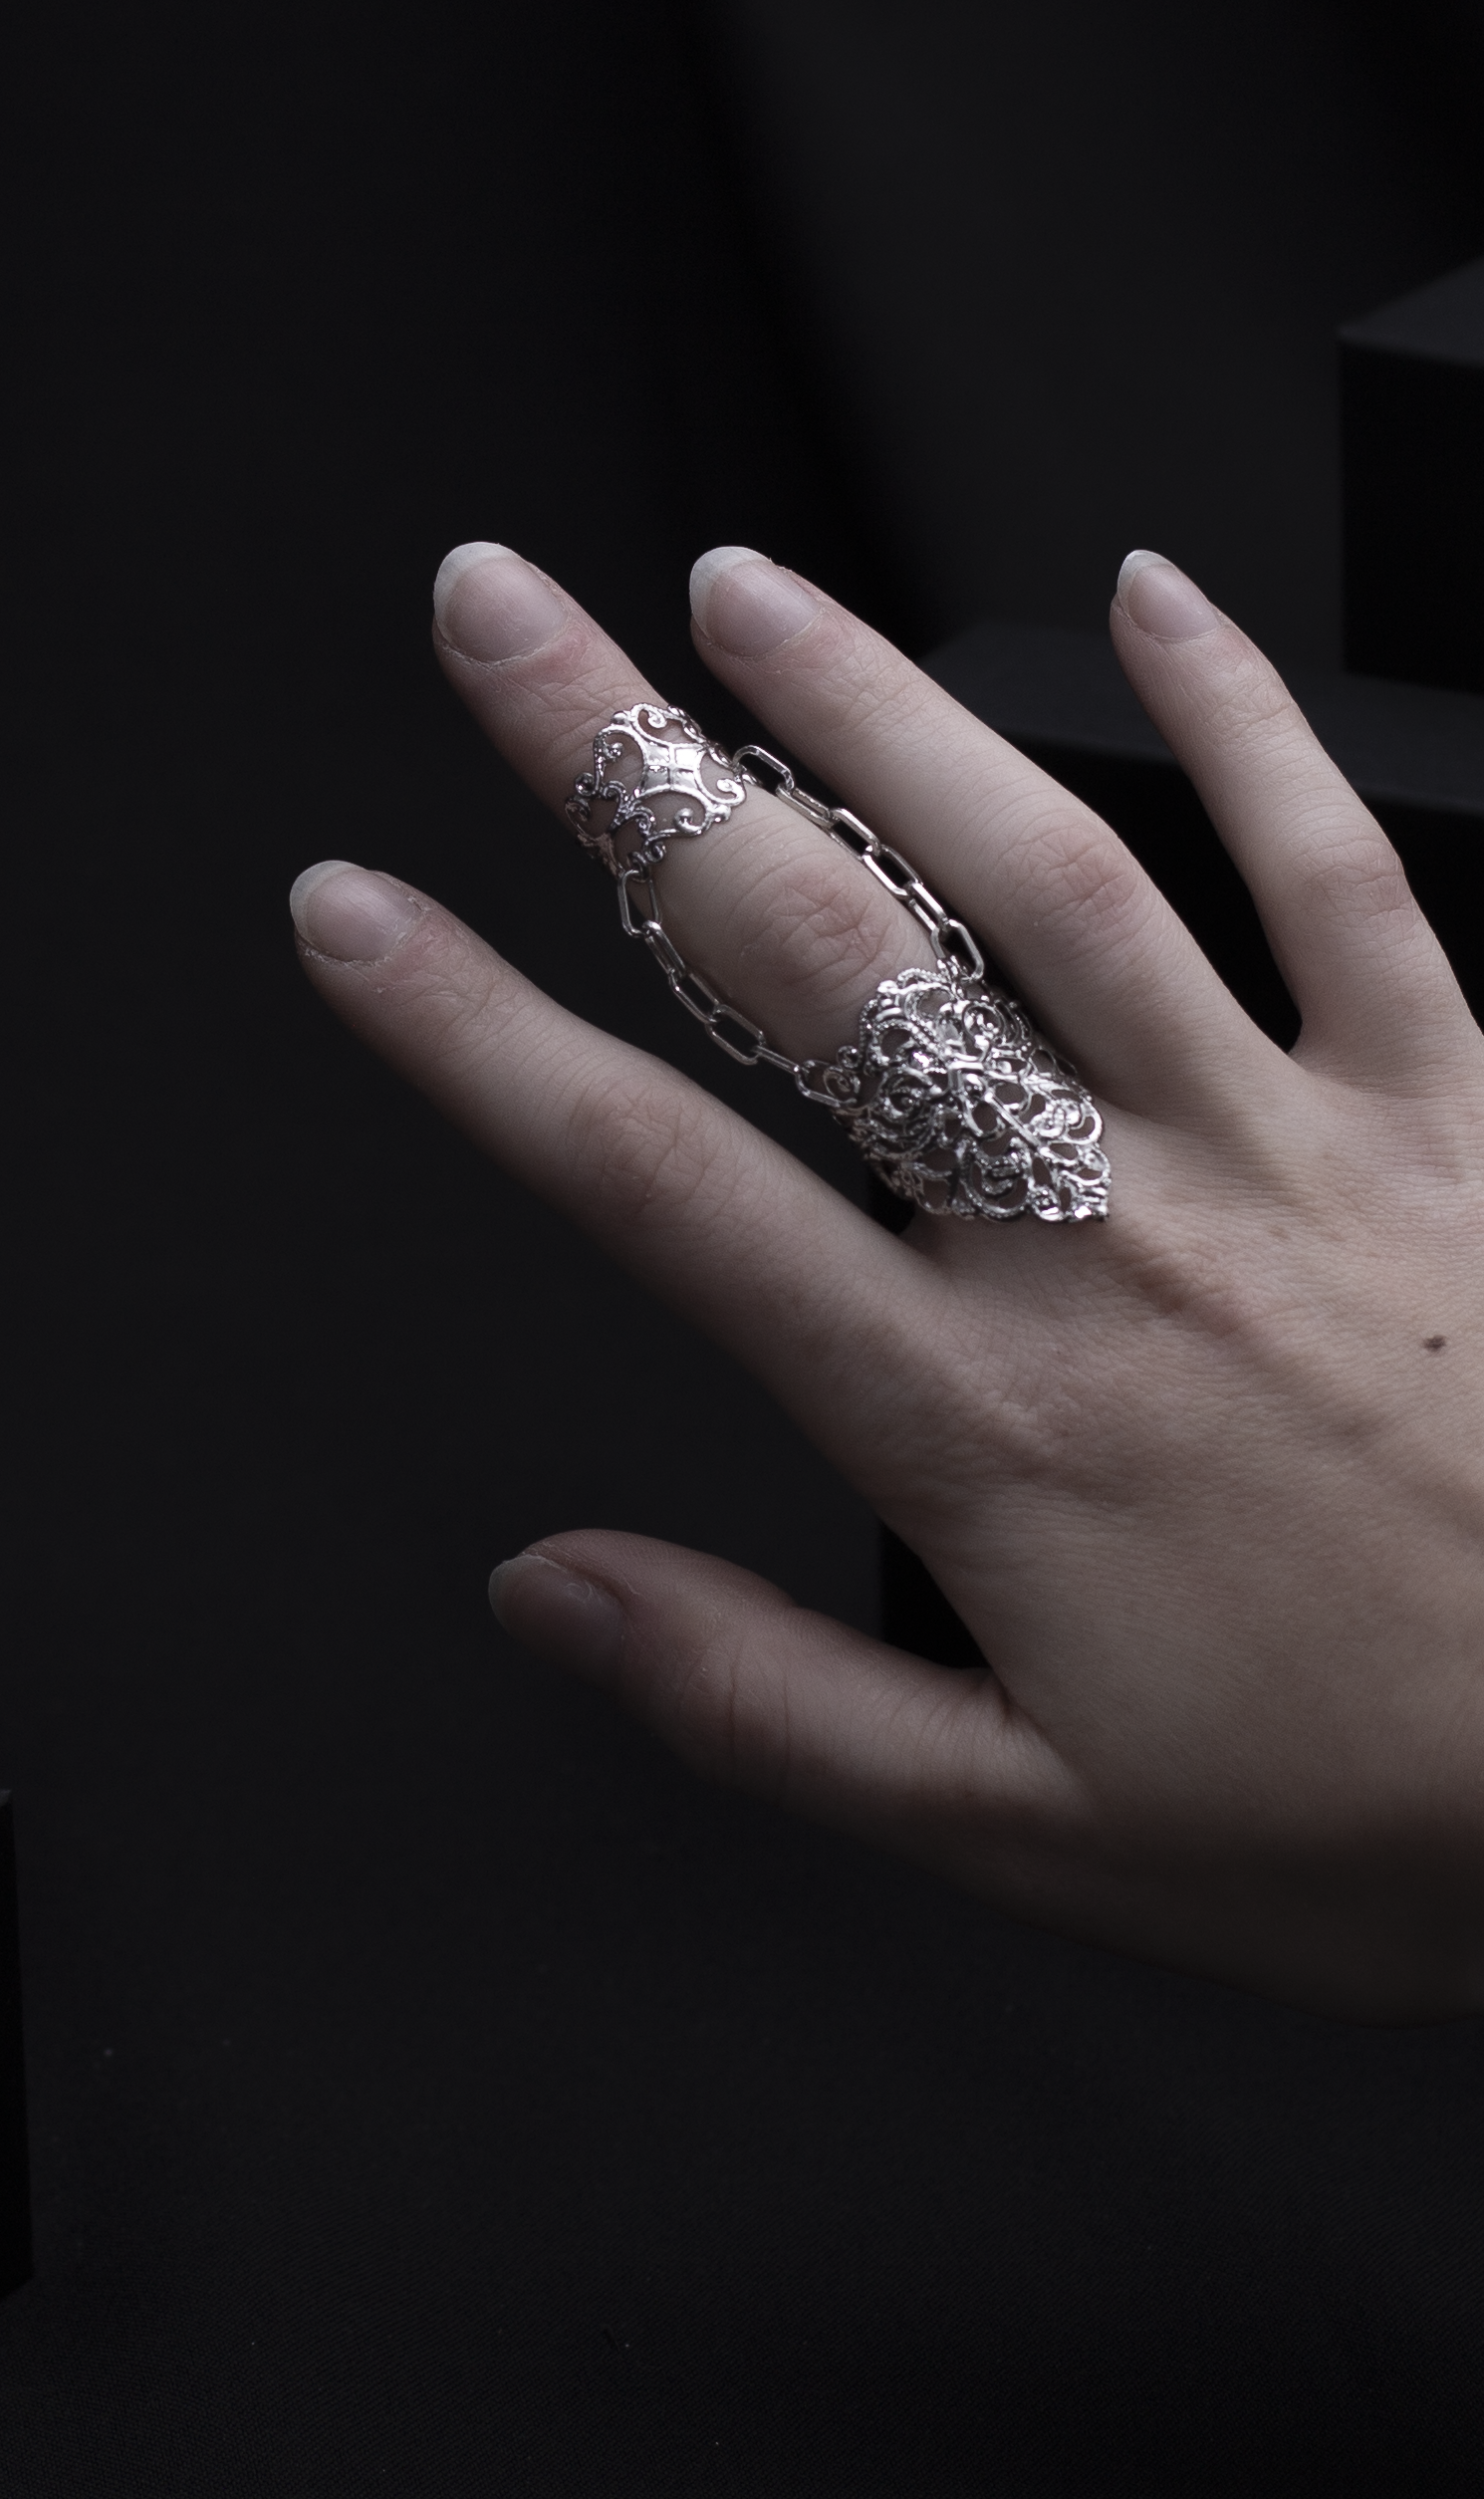 A hand showcases a Myril Jewels gothic double ring with elaborate detailing, embodying a dark, avant-garde style. This bold jewelry piece, perfect for minimal goth enthusiasts, can be a statement piece for festival wear or a unique goth girlfriend gift, infused with the essence of witchcore and whimsigoth trends.